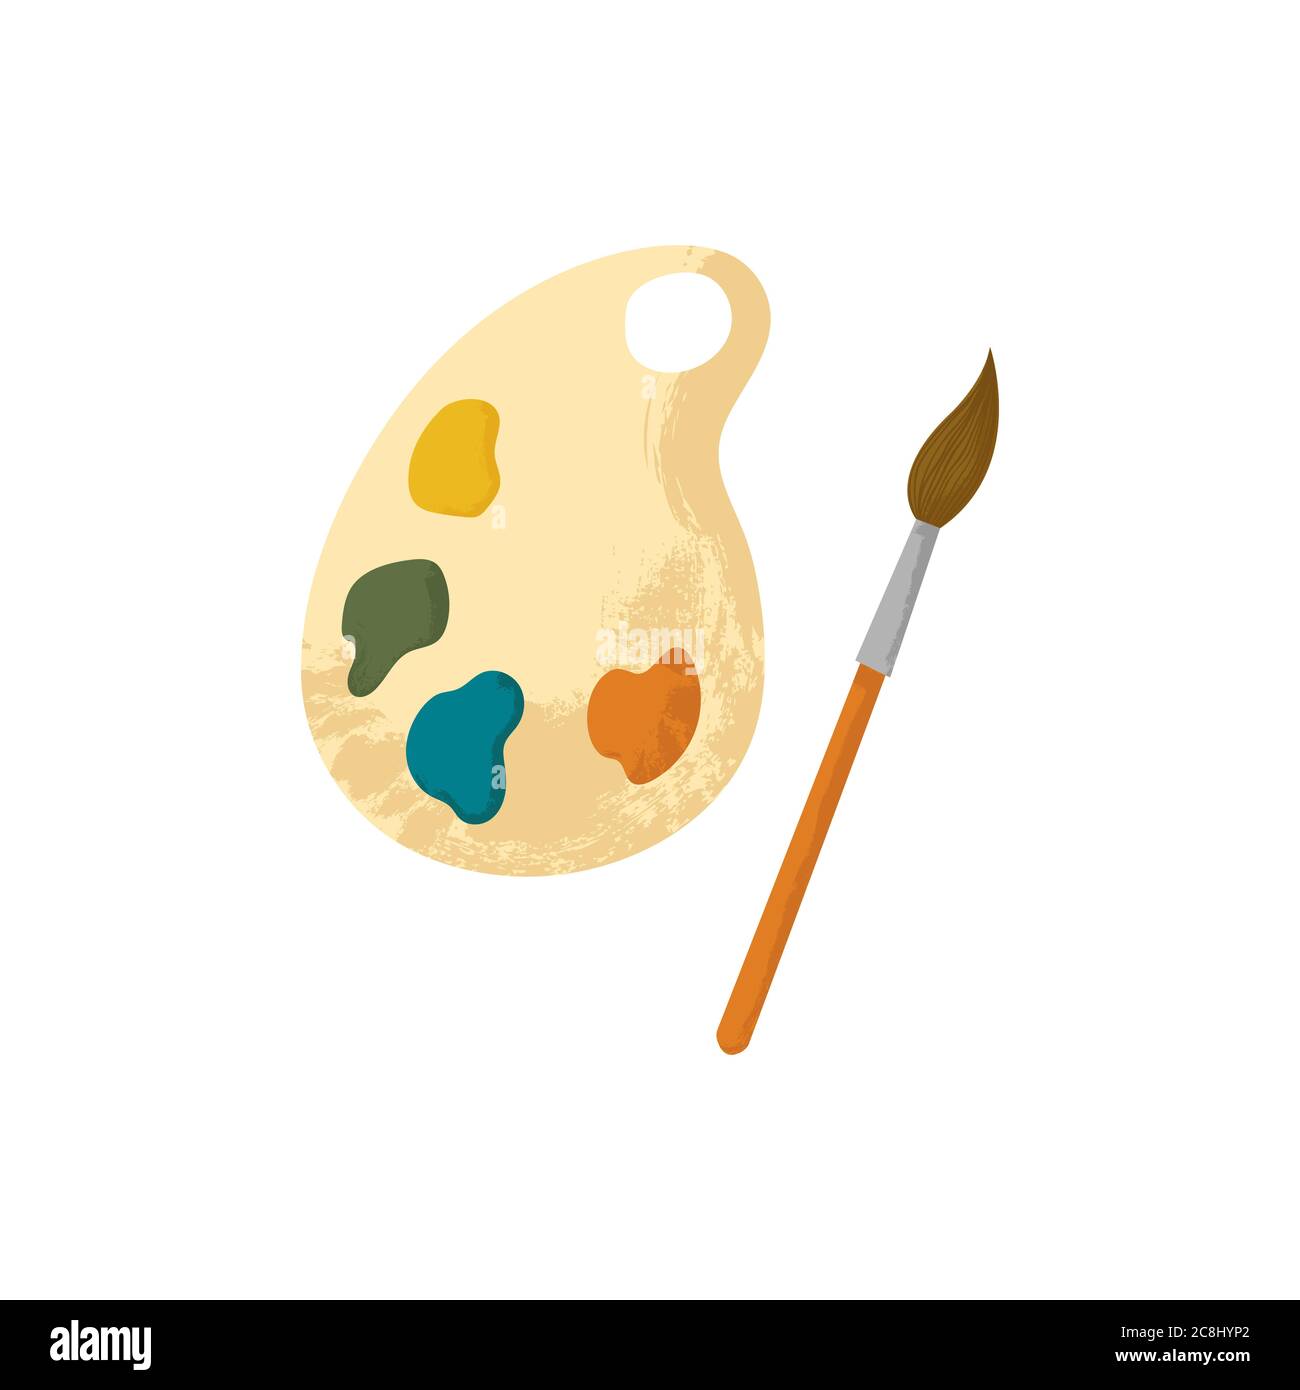 Wooden artist's palette with paints and brush. Vector illustration of cartoon wooden thing with colourful round spots of paints. Flat design with text Stock Vector